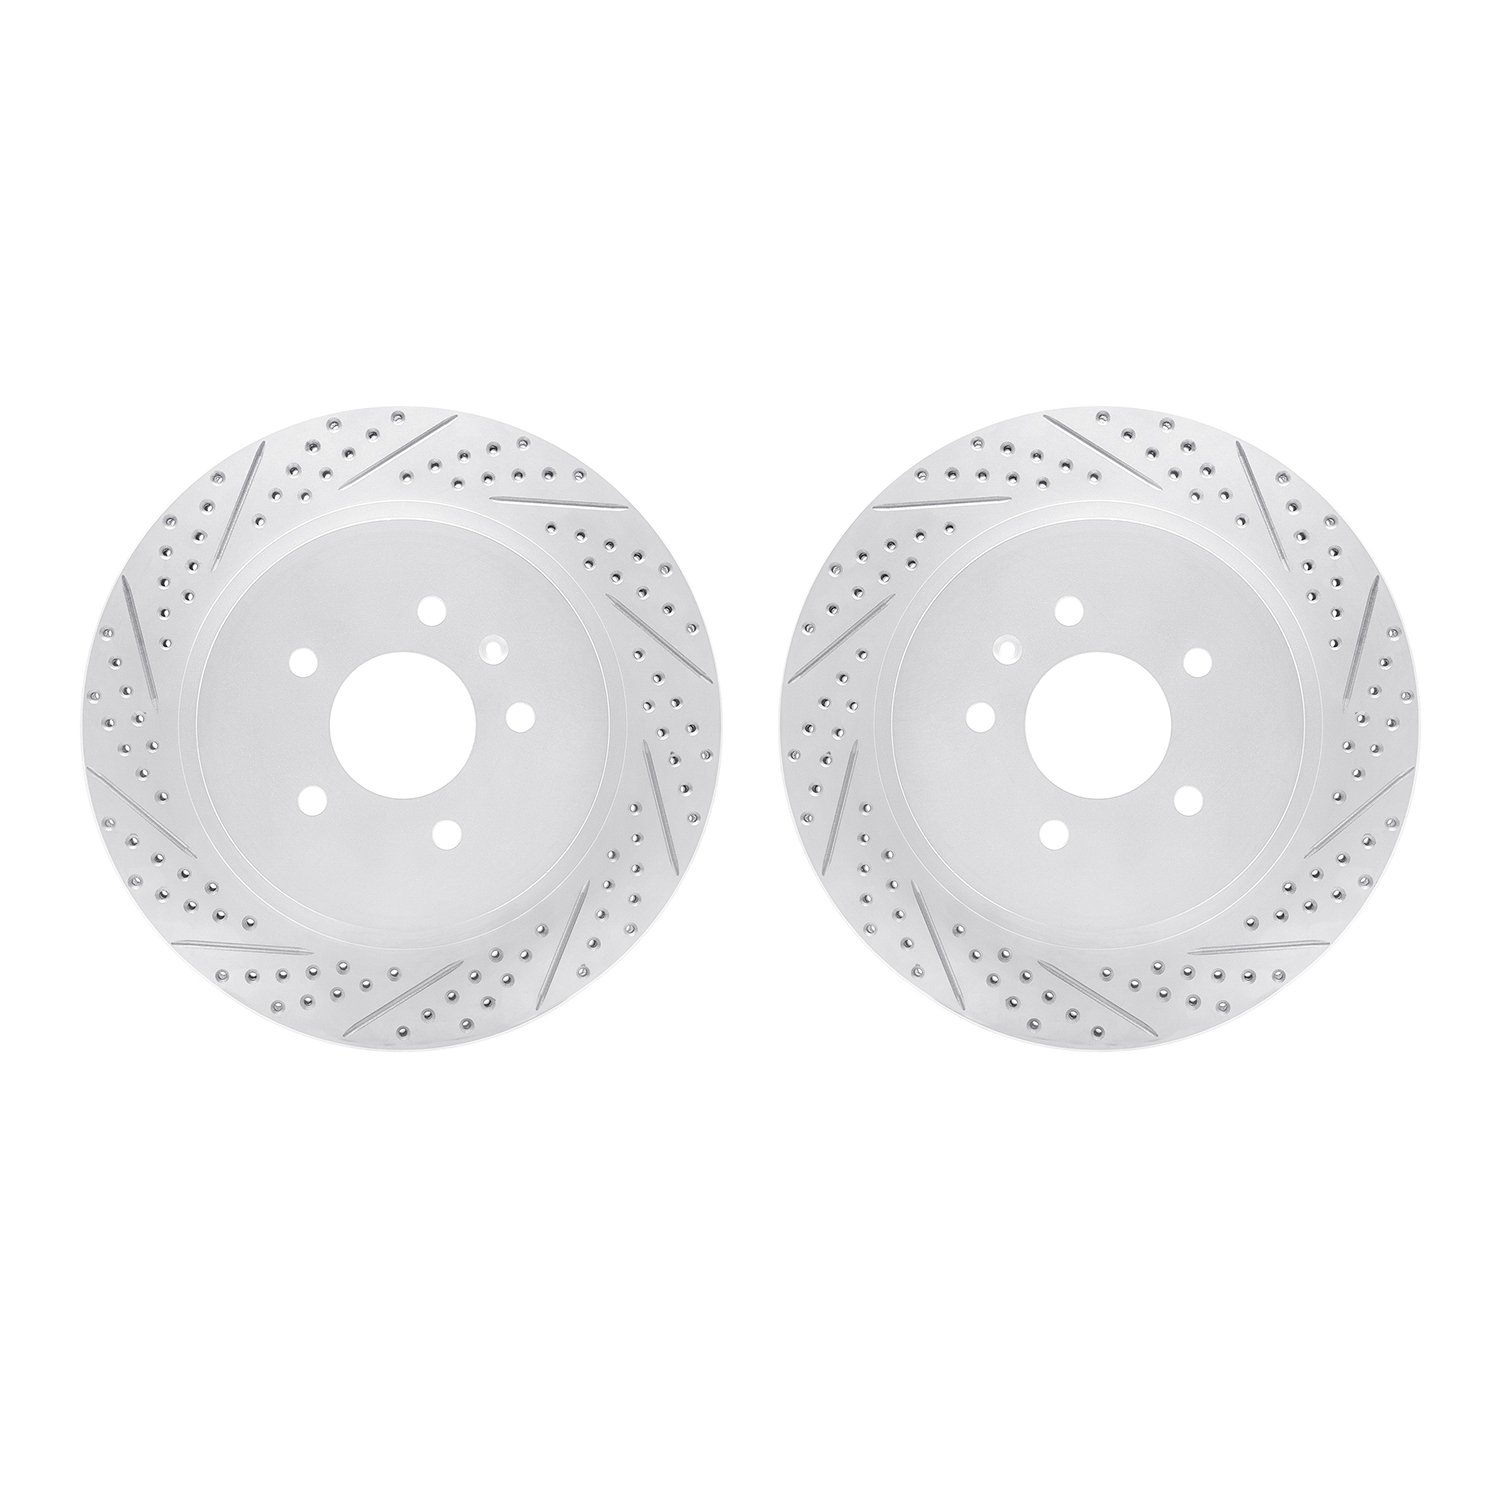 2002-46029 Geoperformance Drilled/Slotted Brake Rotors, 2005-2011 GM, Position: Rear